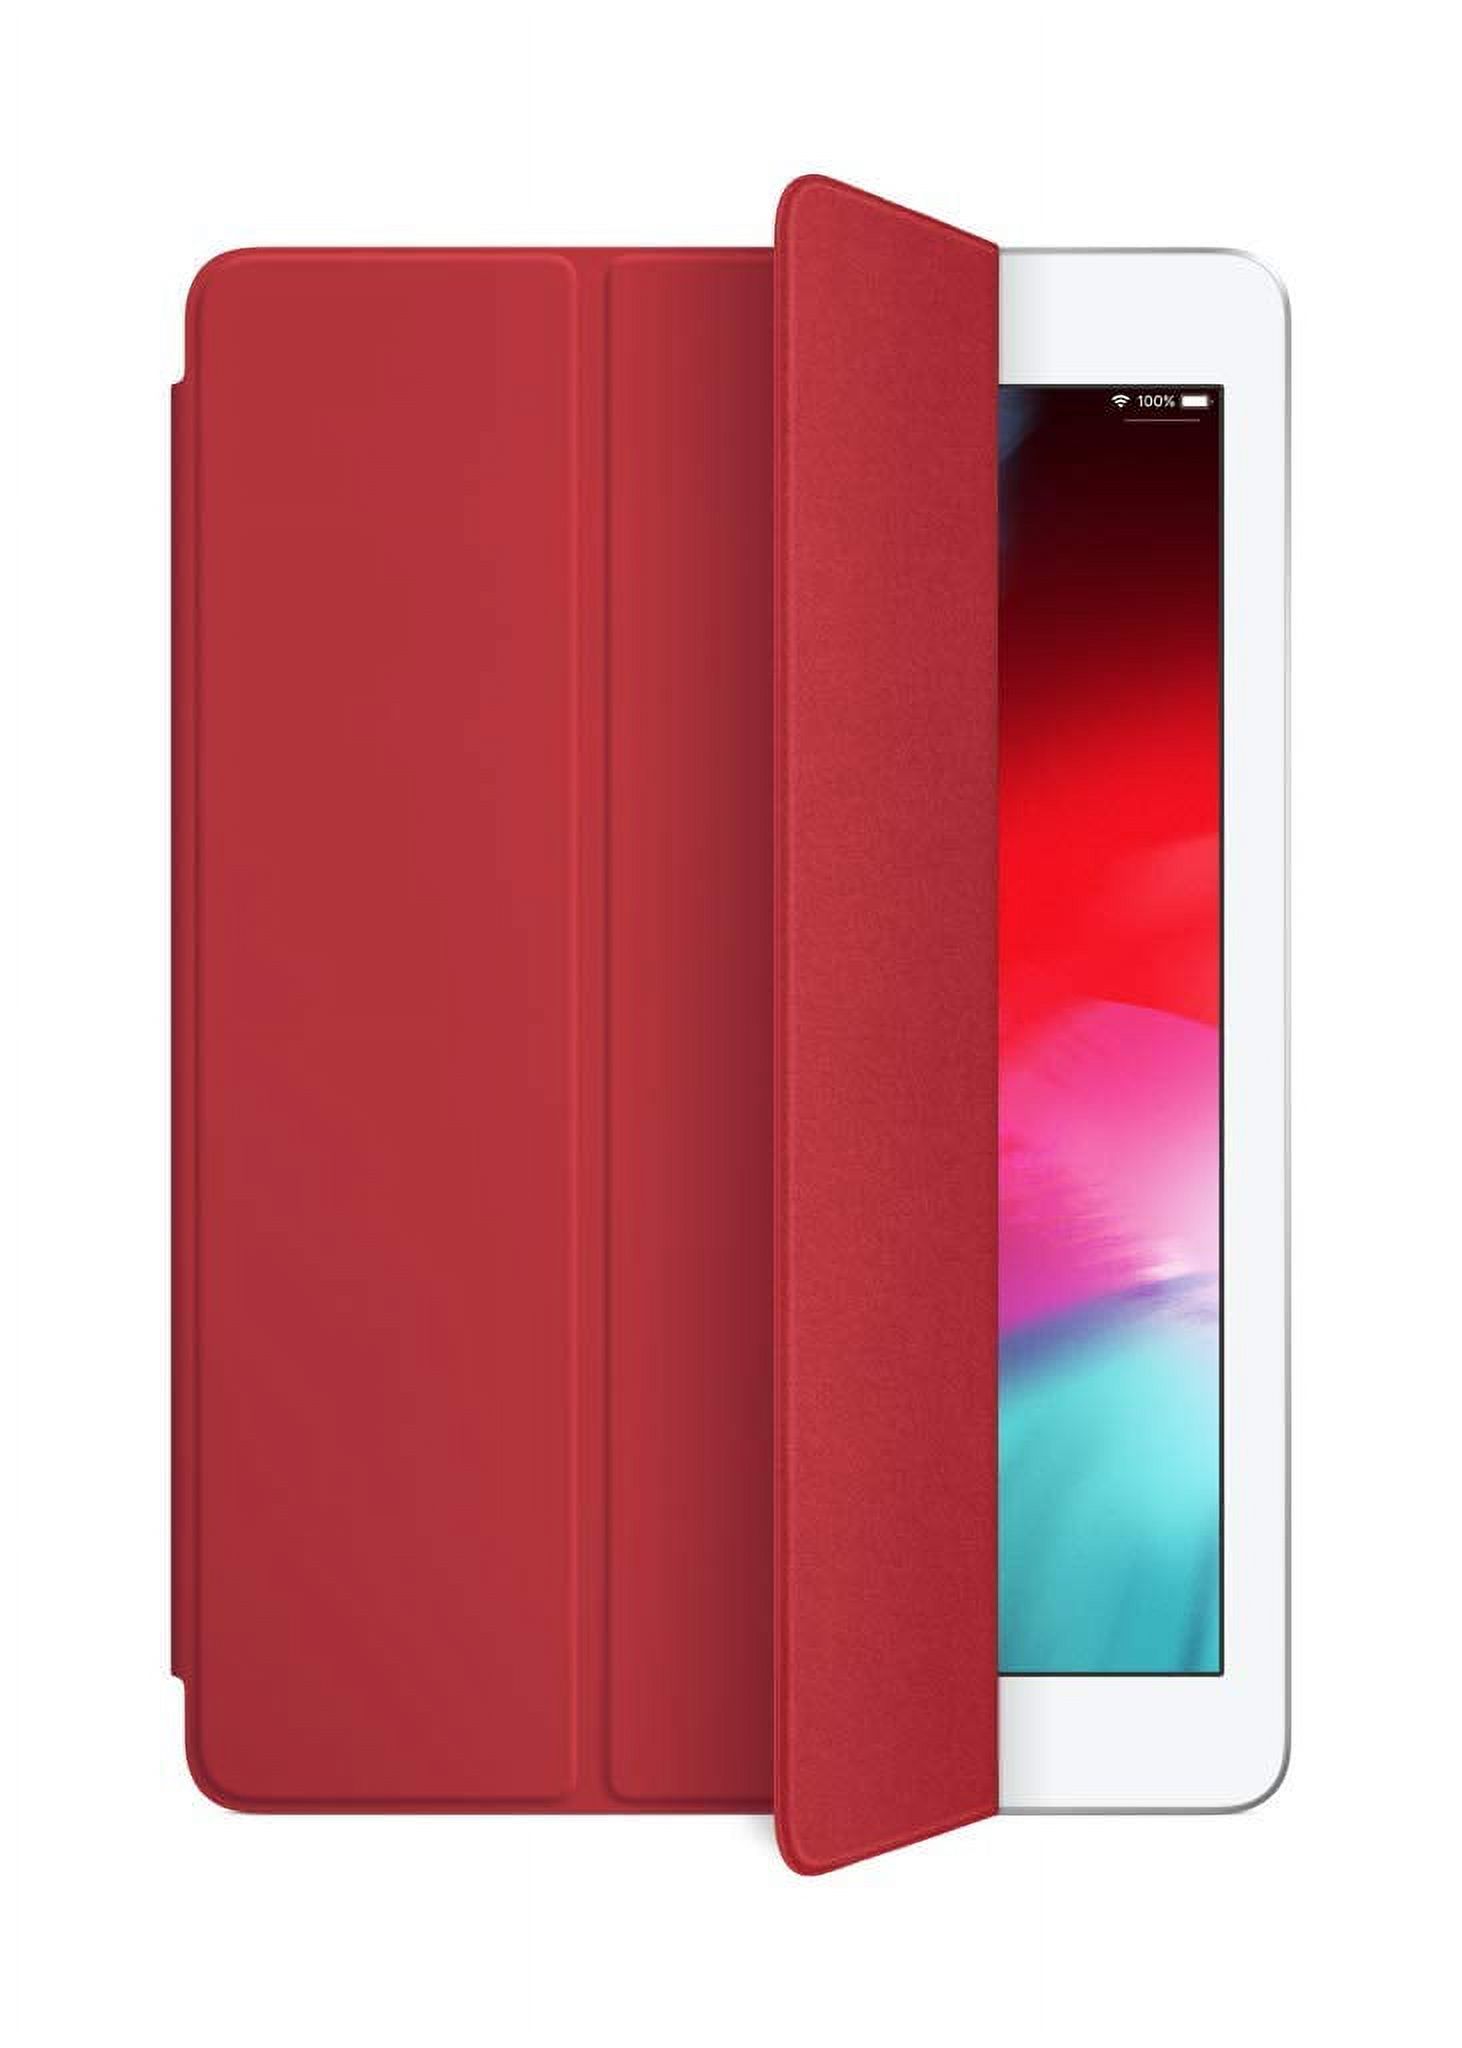 Leather Smart Cover for 10.5" Pad Pro - (Product) Red MR5G2ZM/A - image 1 of 4